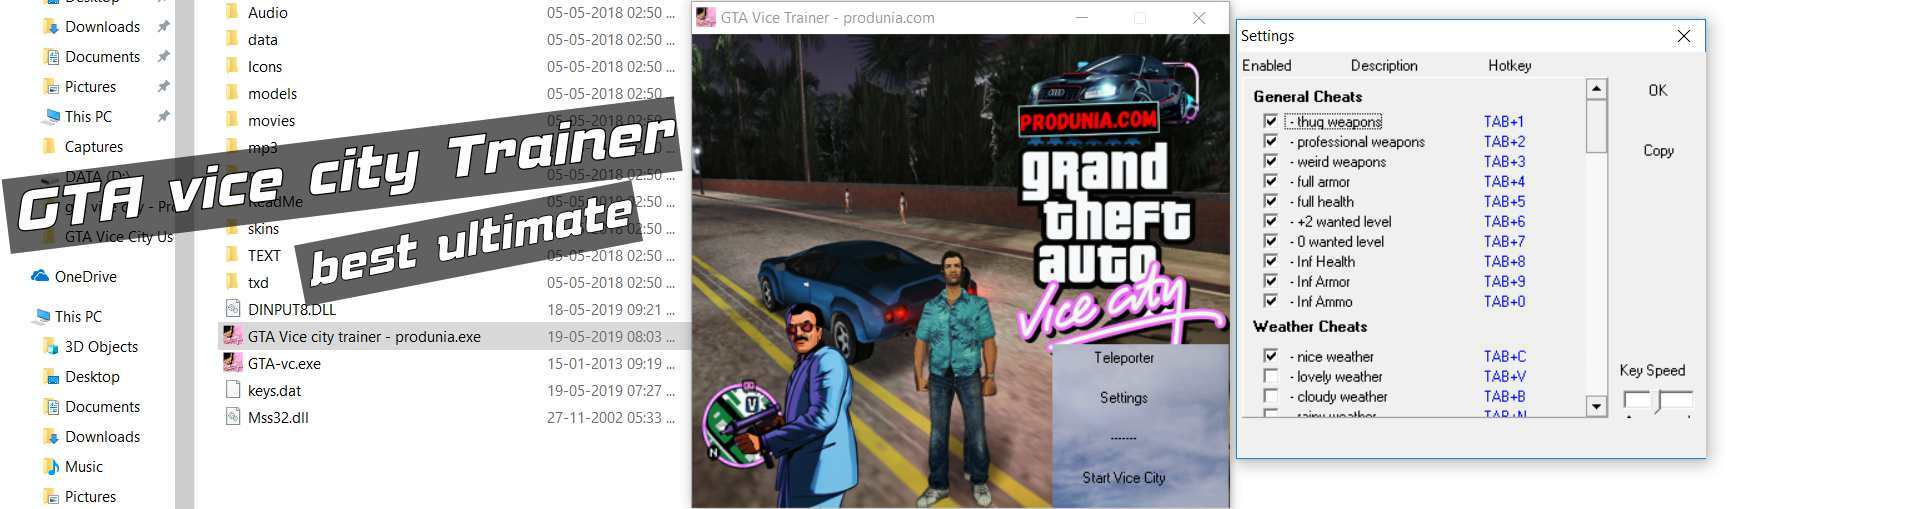 GTA Vice city trainer download for pc - ultimate + Free with keys.dat file